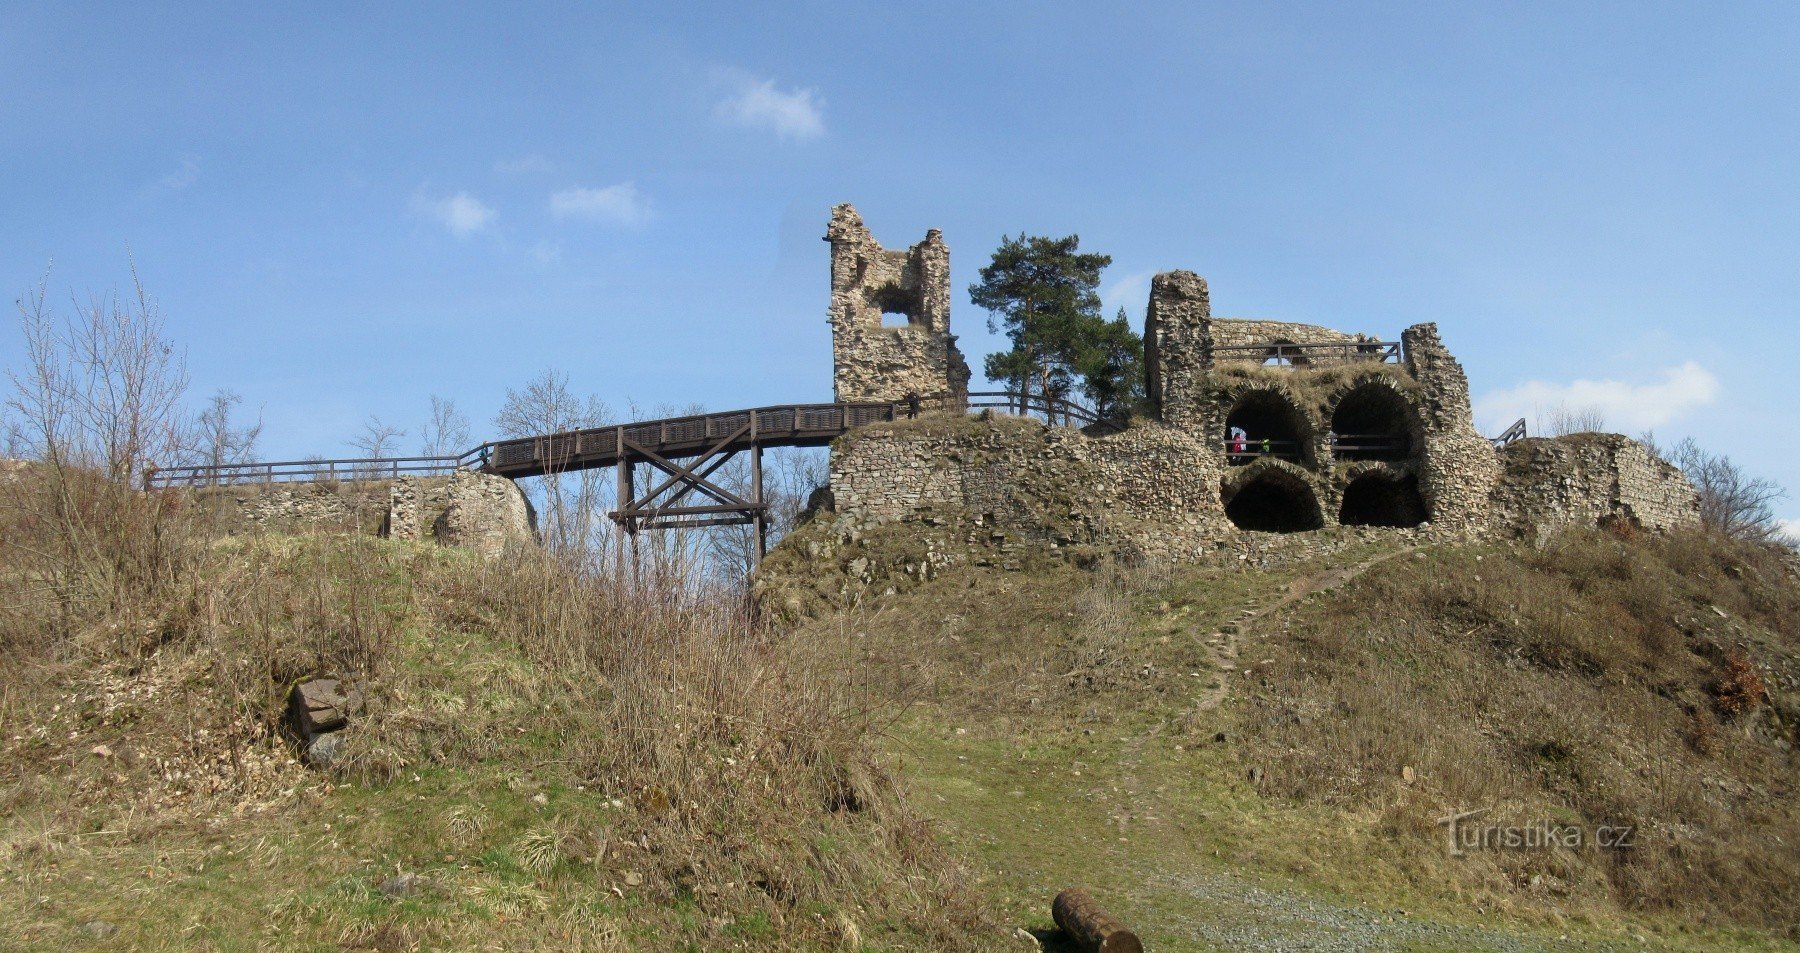 Zubštejn ruins - a place with a distant view